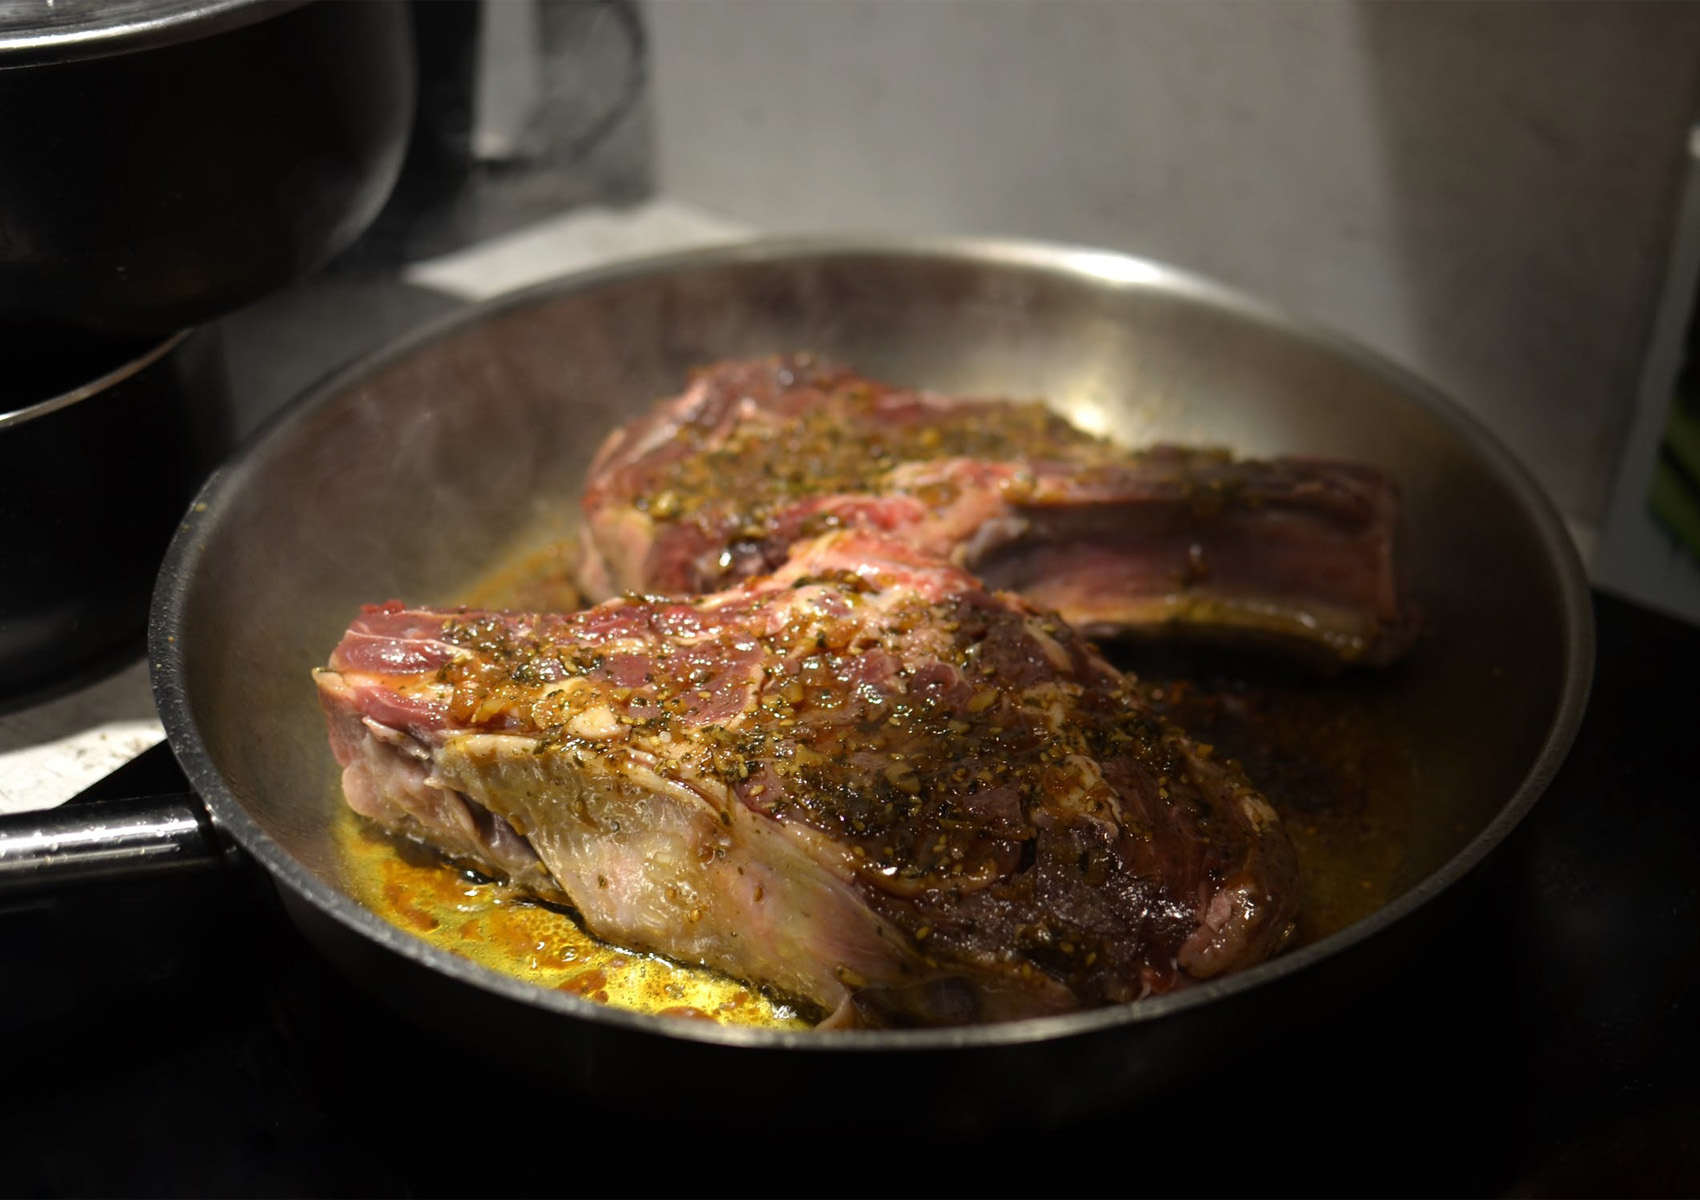 basting steak with butter and herbs in a hot skillet